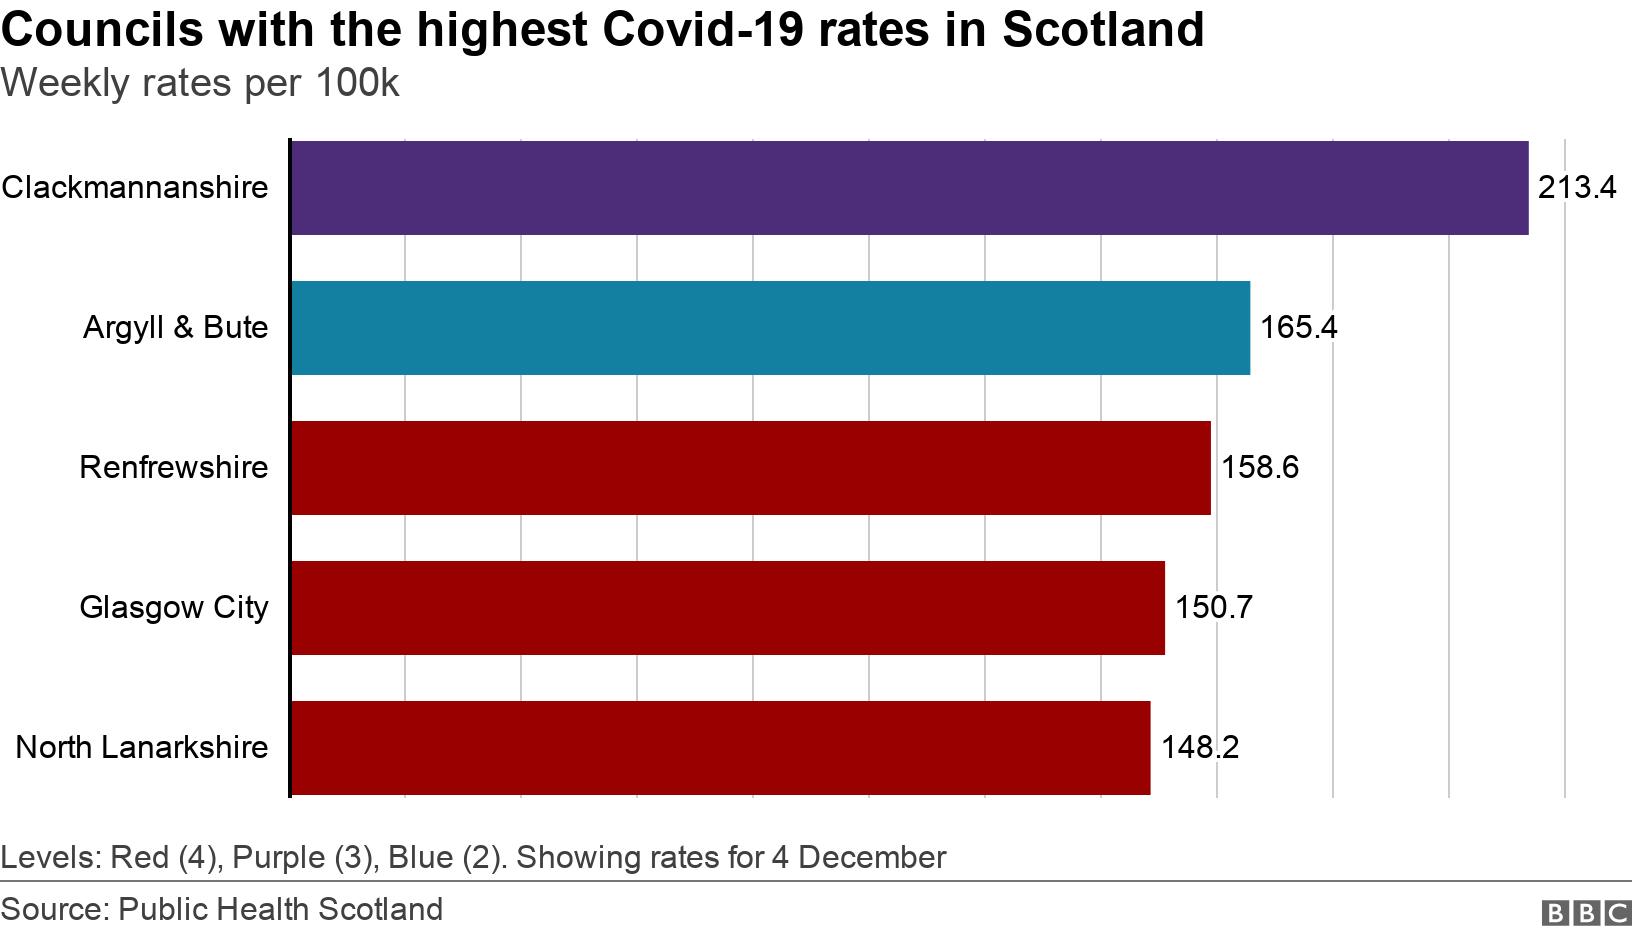 Councils with the highest Covid-19 rates in Scotland. Weekly rates per 100k. Levels: Red (4), Purple (3), Blue (2). Showing rates for 4 December.